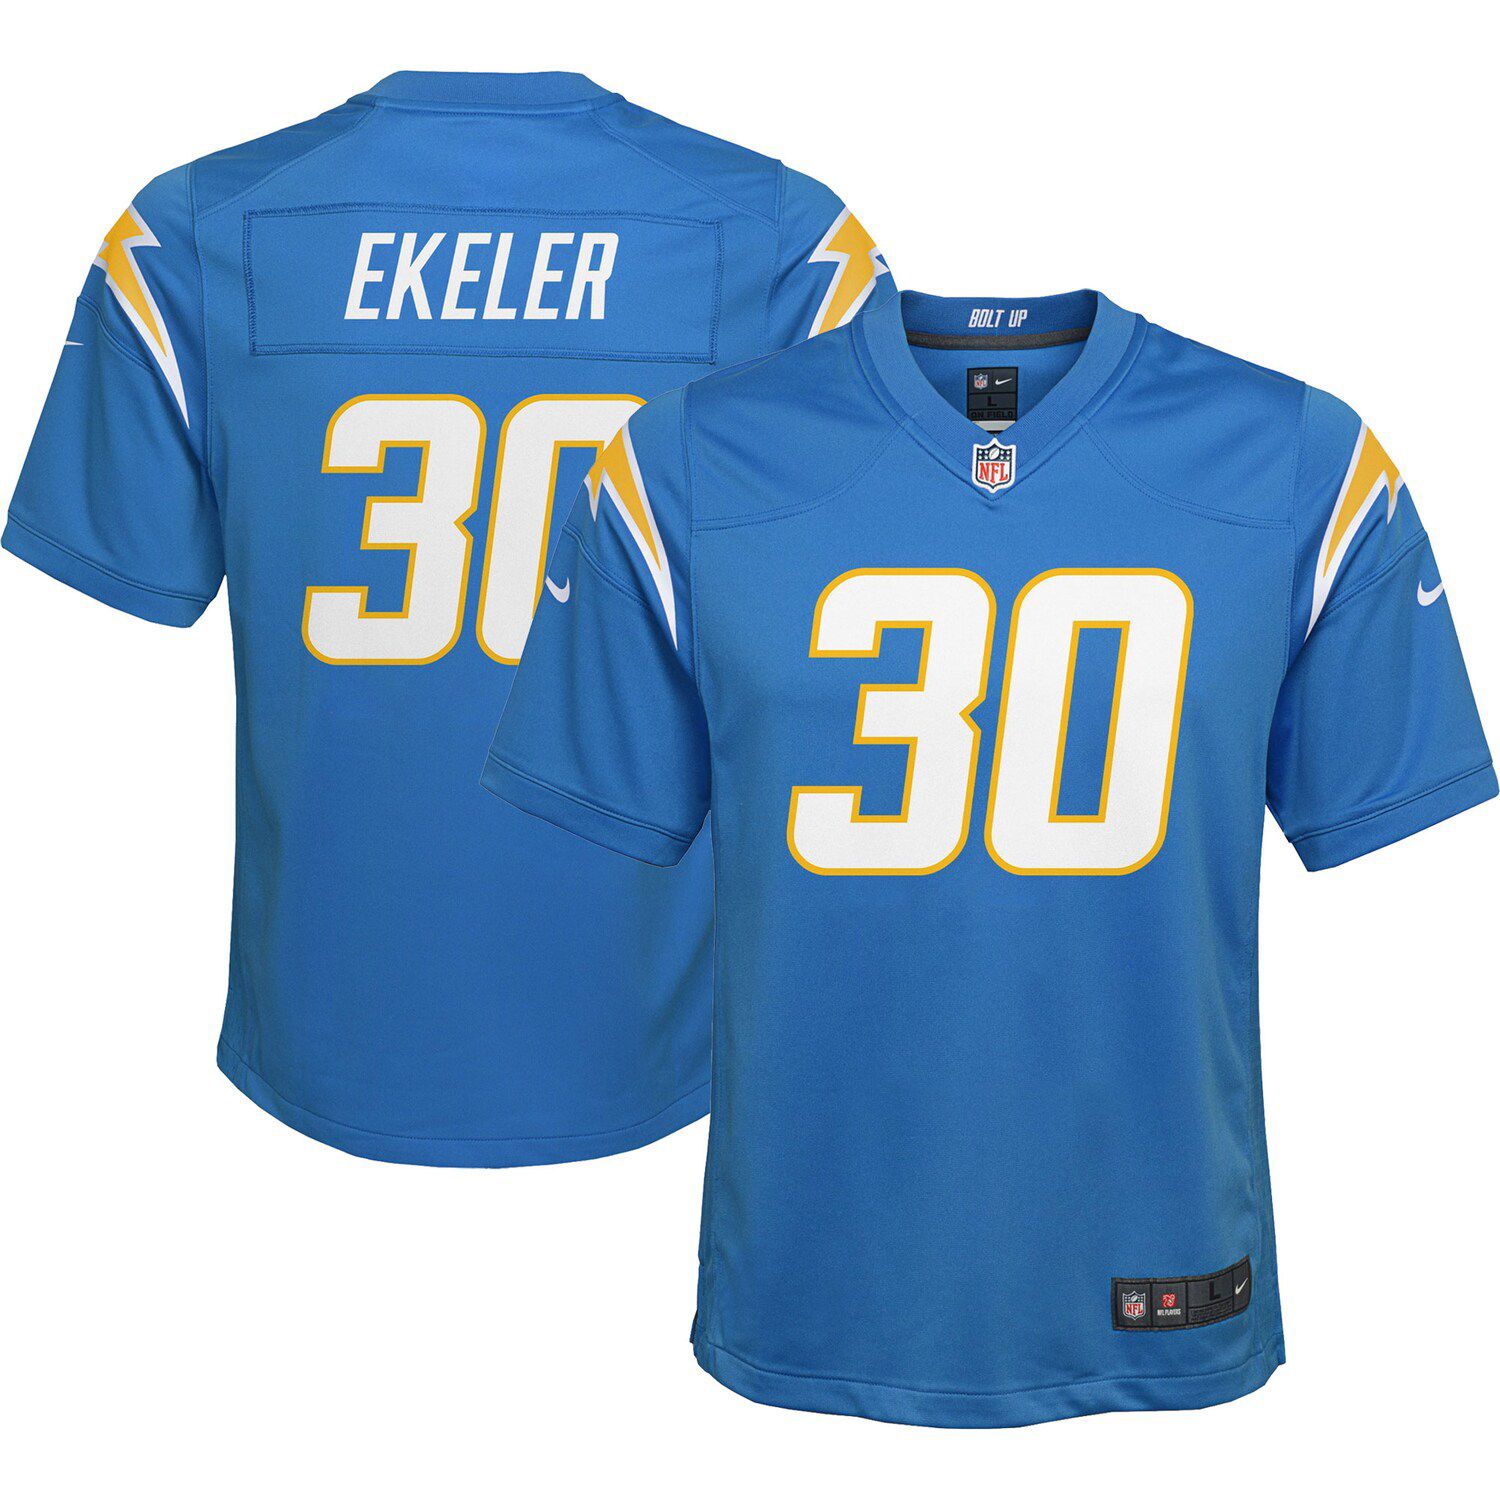 los angeles chargers youth jersey